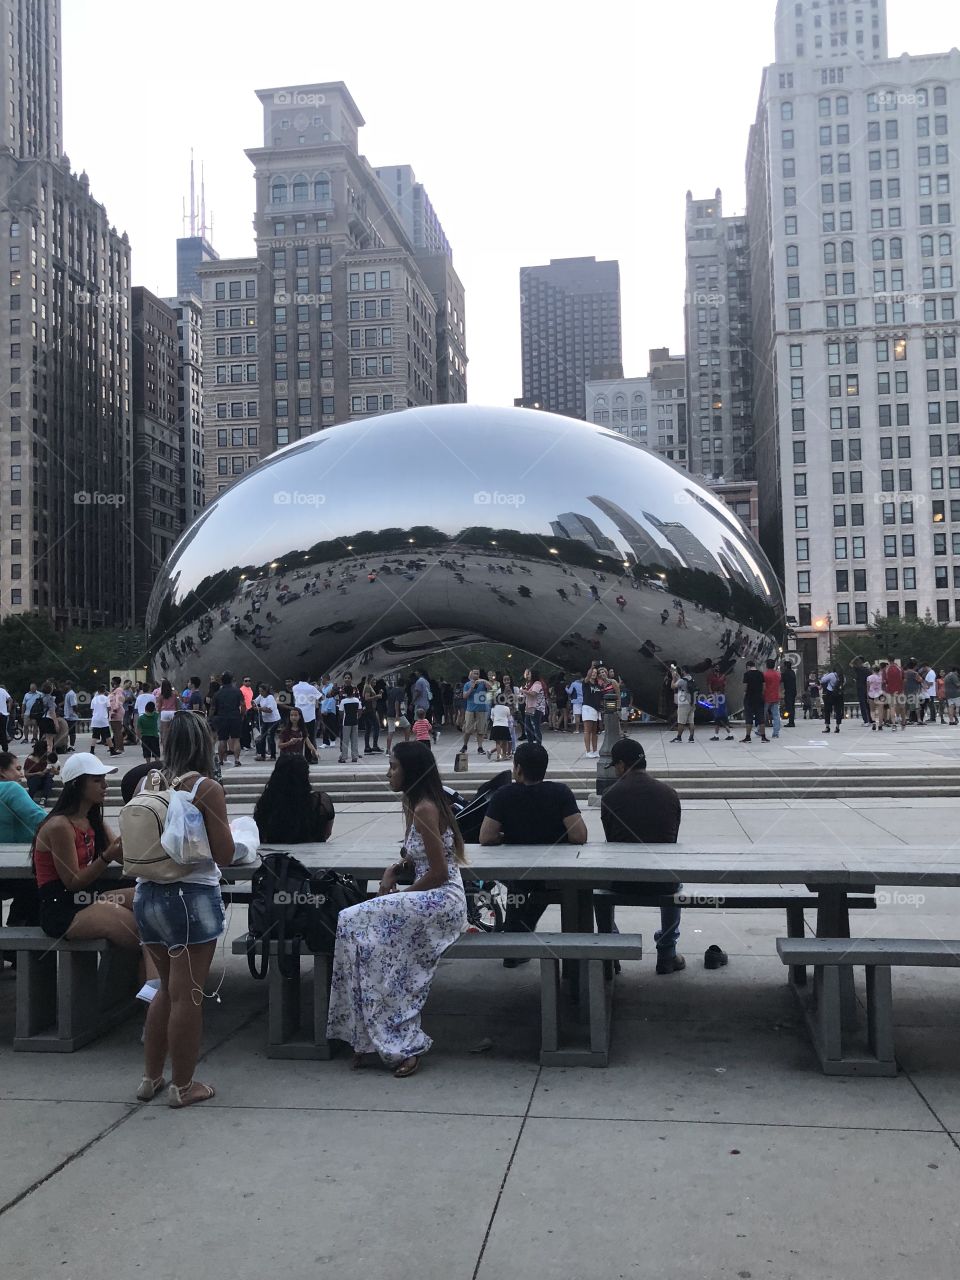 A full view of this unique monument locates in downtown Chicago. The amazing bean!